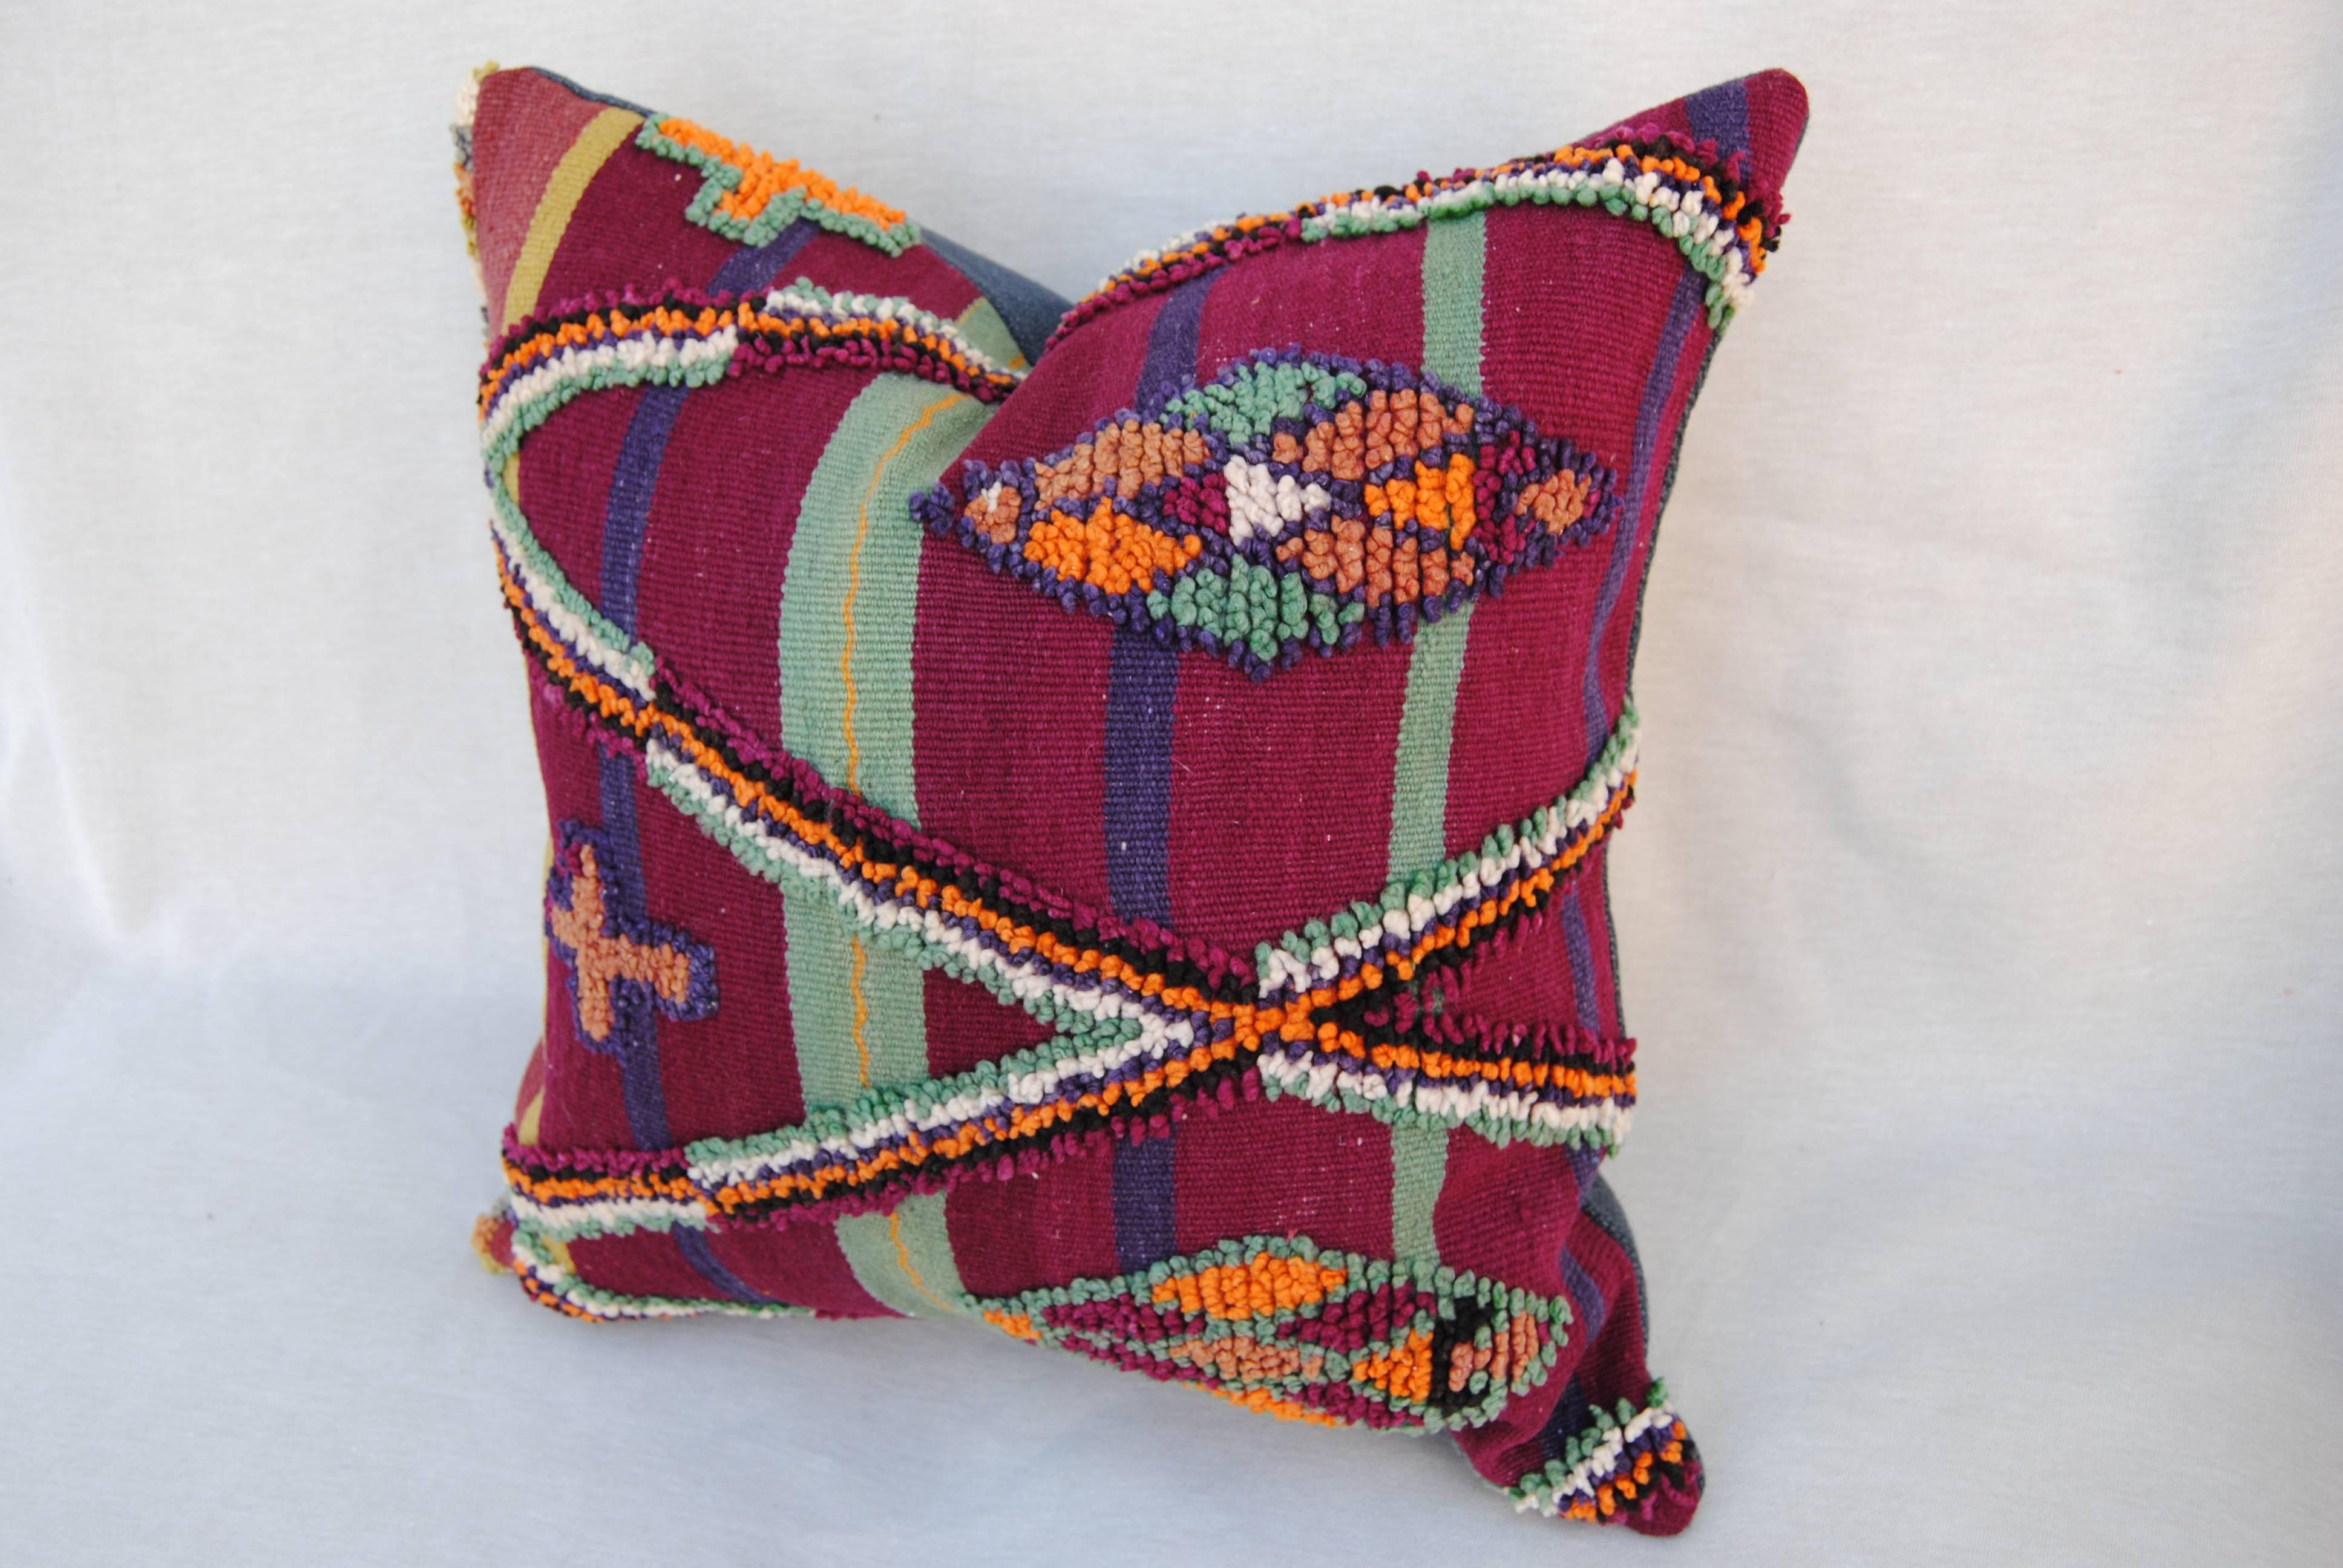 Custom pillow cut from a hand-loomed wool Moroccan Berber rug from the Atlas Mountains. Wool is soft with strong natural colors. Flat-weave stripes are embellished with tufted wool tribal designs. Pillow is backed in a dark blue linen blend, filled